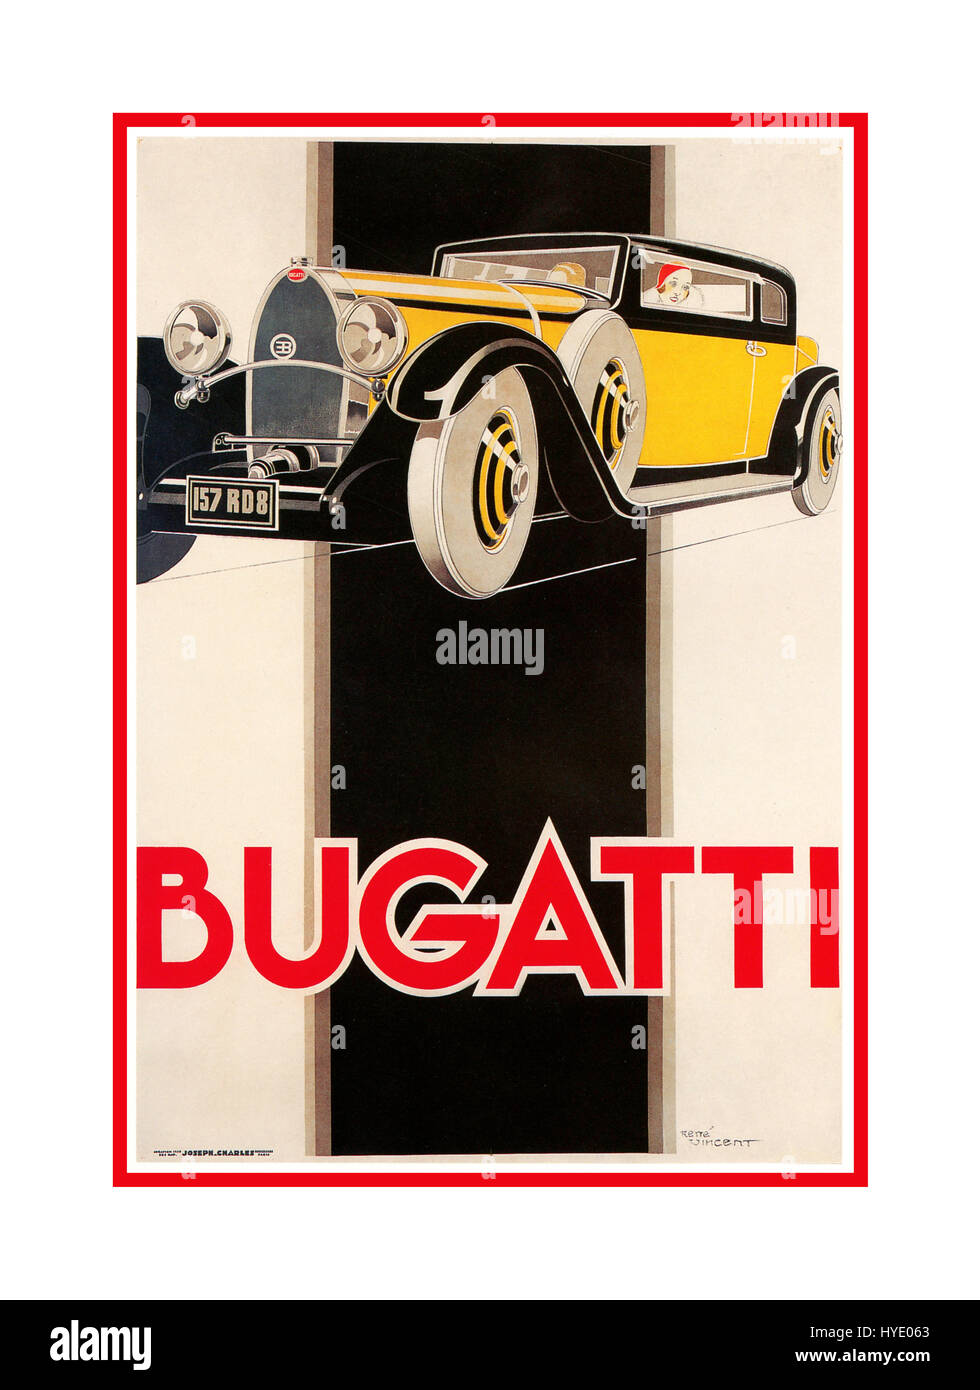 BUGATTI Vintage retro French 1920s Sports Car Bugatti Motor Racing Poster Automobiles Ettore Bugatti was a French car manufacturer of high-performance automobiles, founded in 1909 Stock Photo